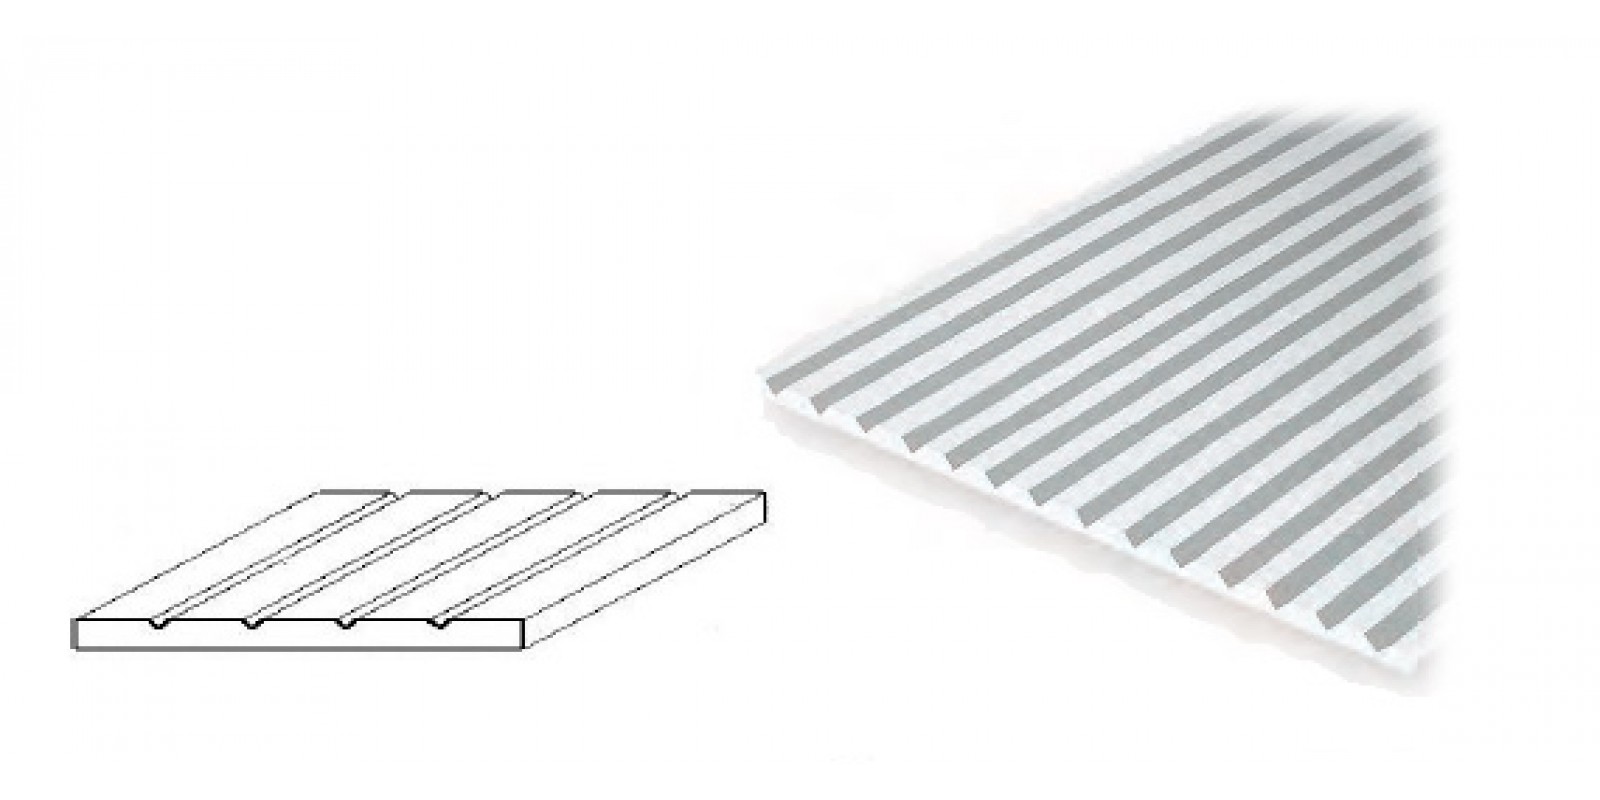 FA504250 Gauge Neutral structured plate with V-groove, white, 300 x 150 x 1 mm, grid: 6.4 mm